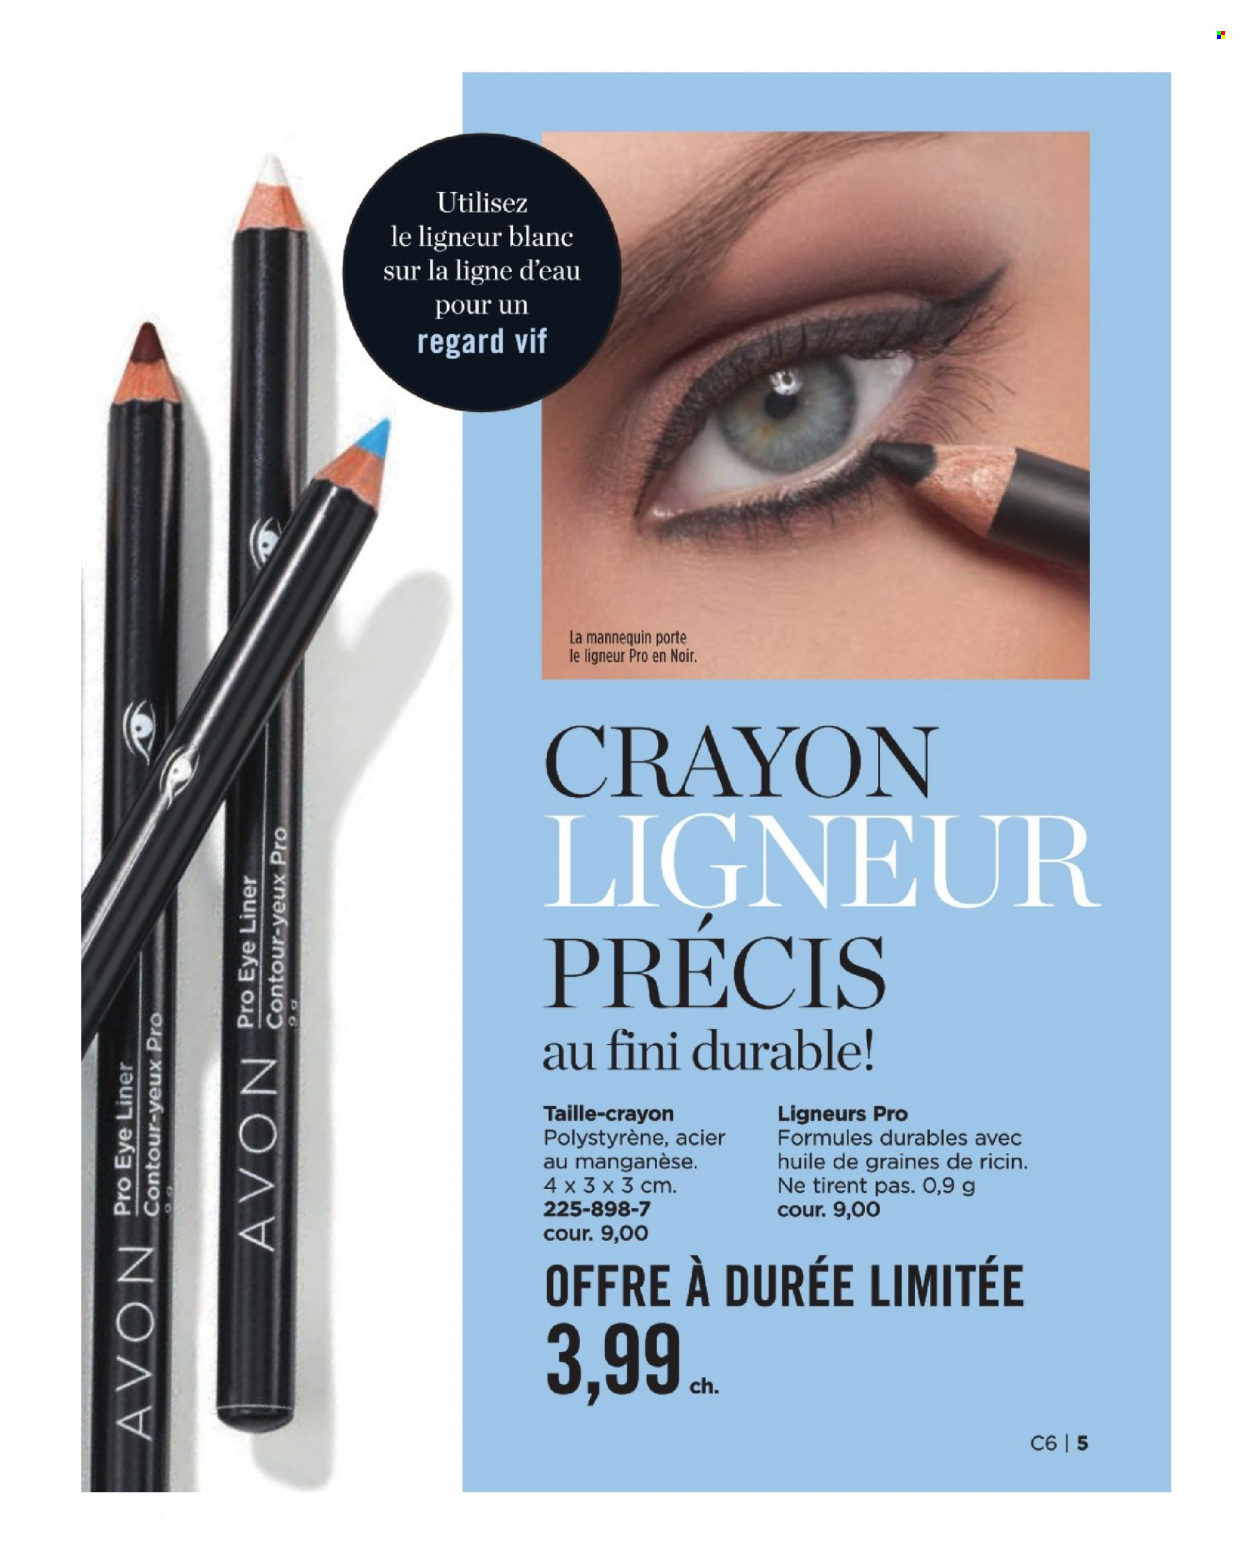 thumbnail - Avon Flyer - Sales products - Avon, contour, eyeliner. Page 5.